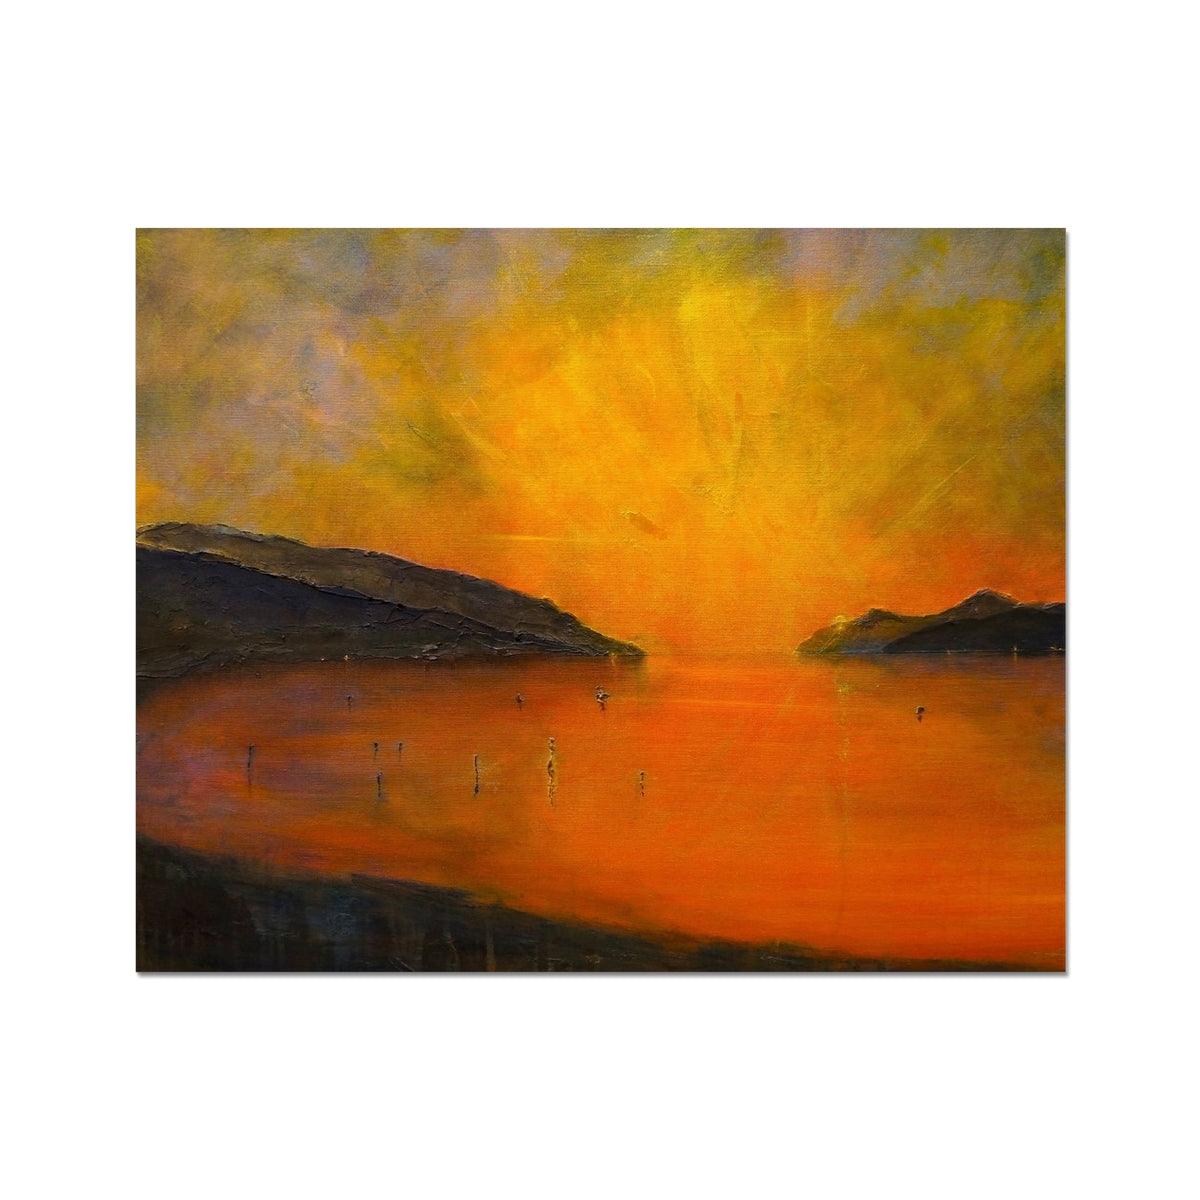 Loch Ness Sunset Painting | Hahnemühle German Etching Prints From Scotland-Fine art-Scottish Lochs & Mountains Art Gallery-20"x16"-Paintings, Prints, Homeware, Art Gifts From Scotland By Scottish Artist Kevin Hunter